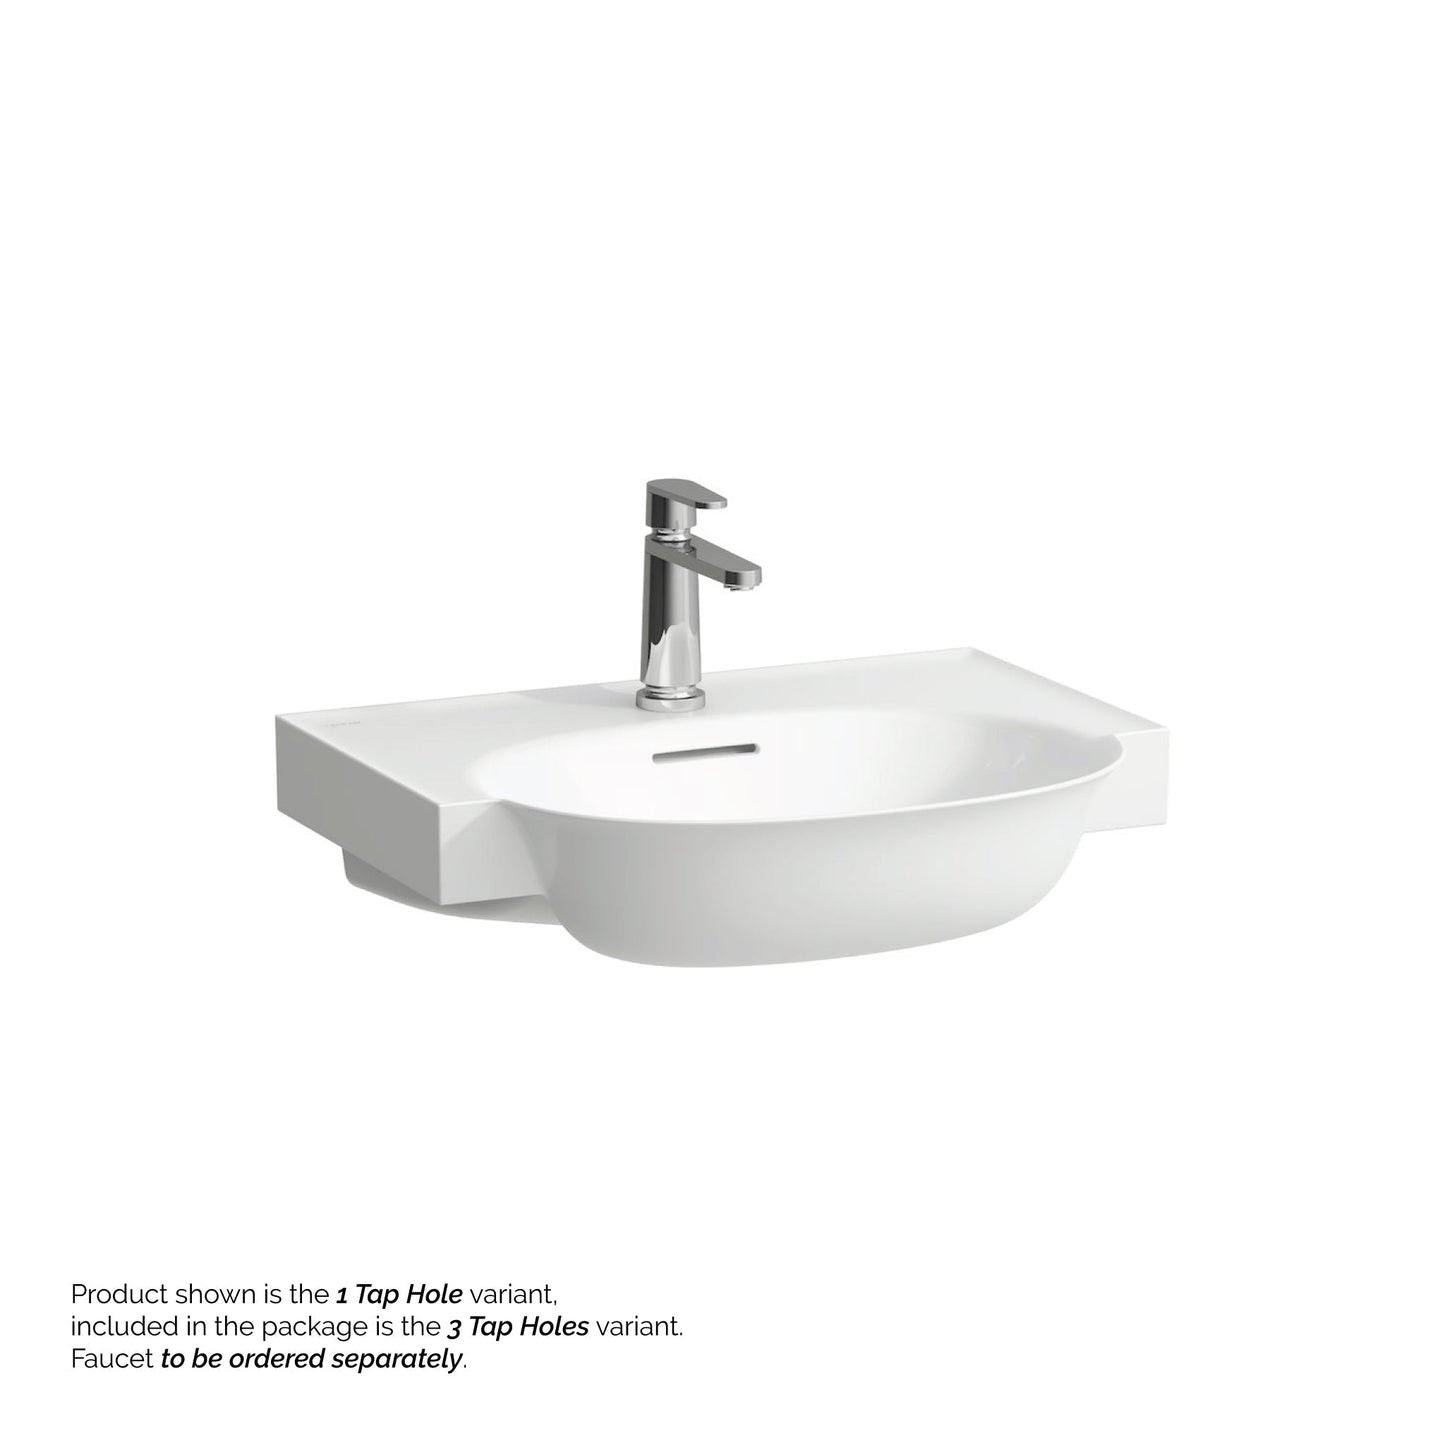 Laufen New Classic 24" x 19" Matte White Ceramic Wall-Mounted Bathroom Sink With 3 Faucet Holes